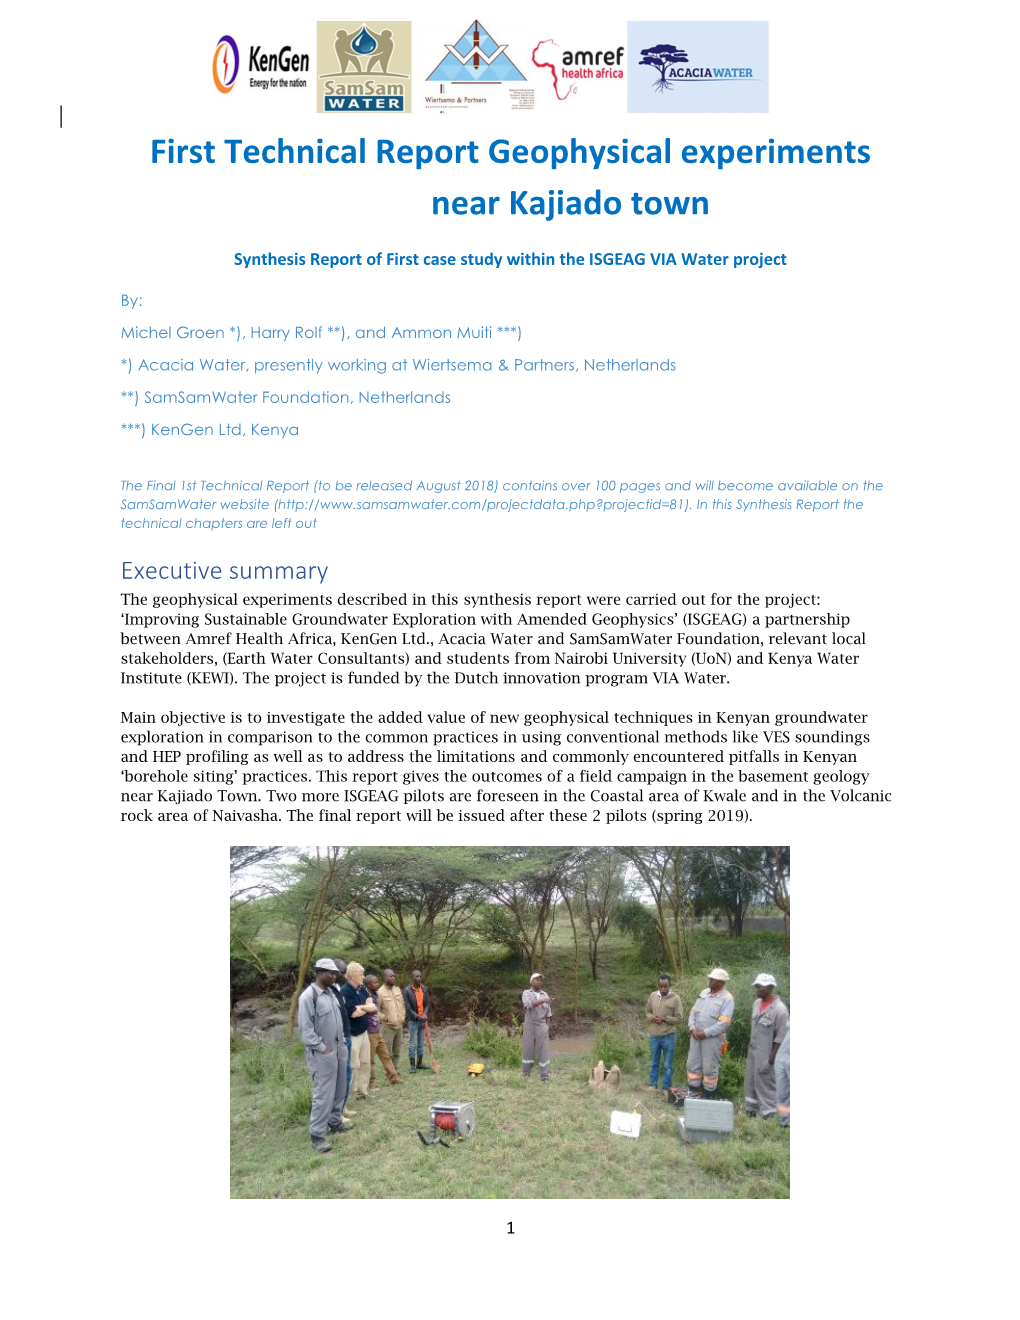 First Technical Report Geophysical Experiments Near Kajiado Town